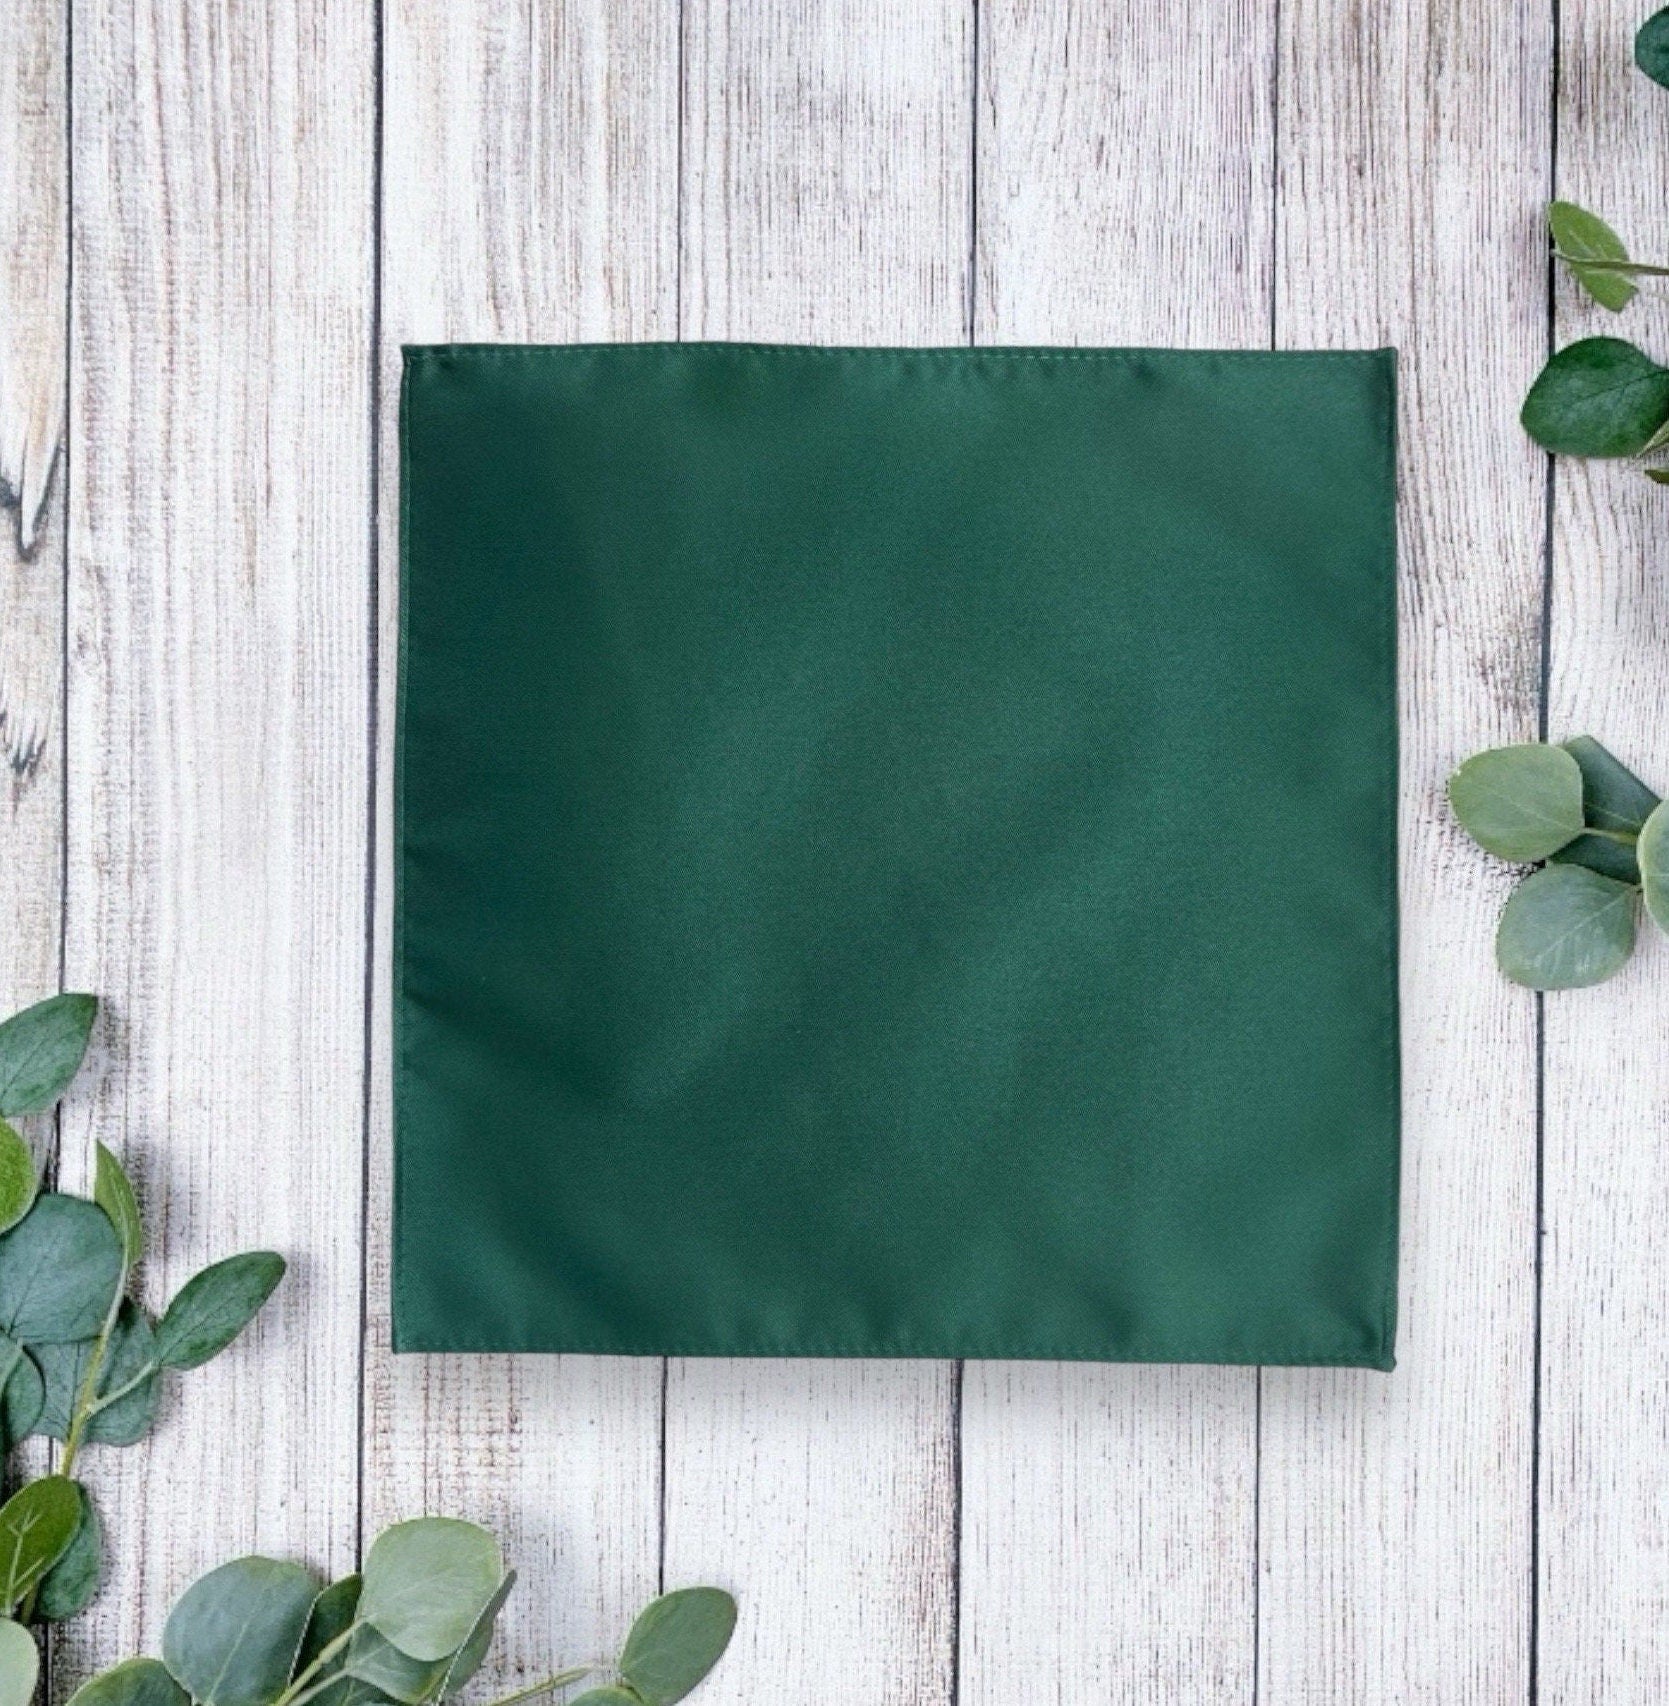 Emerald green pocket square for a wedding.